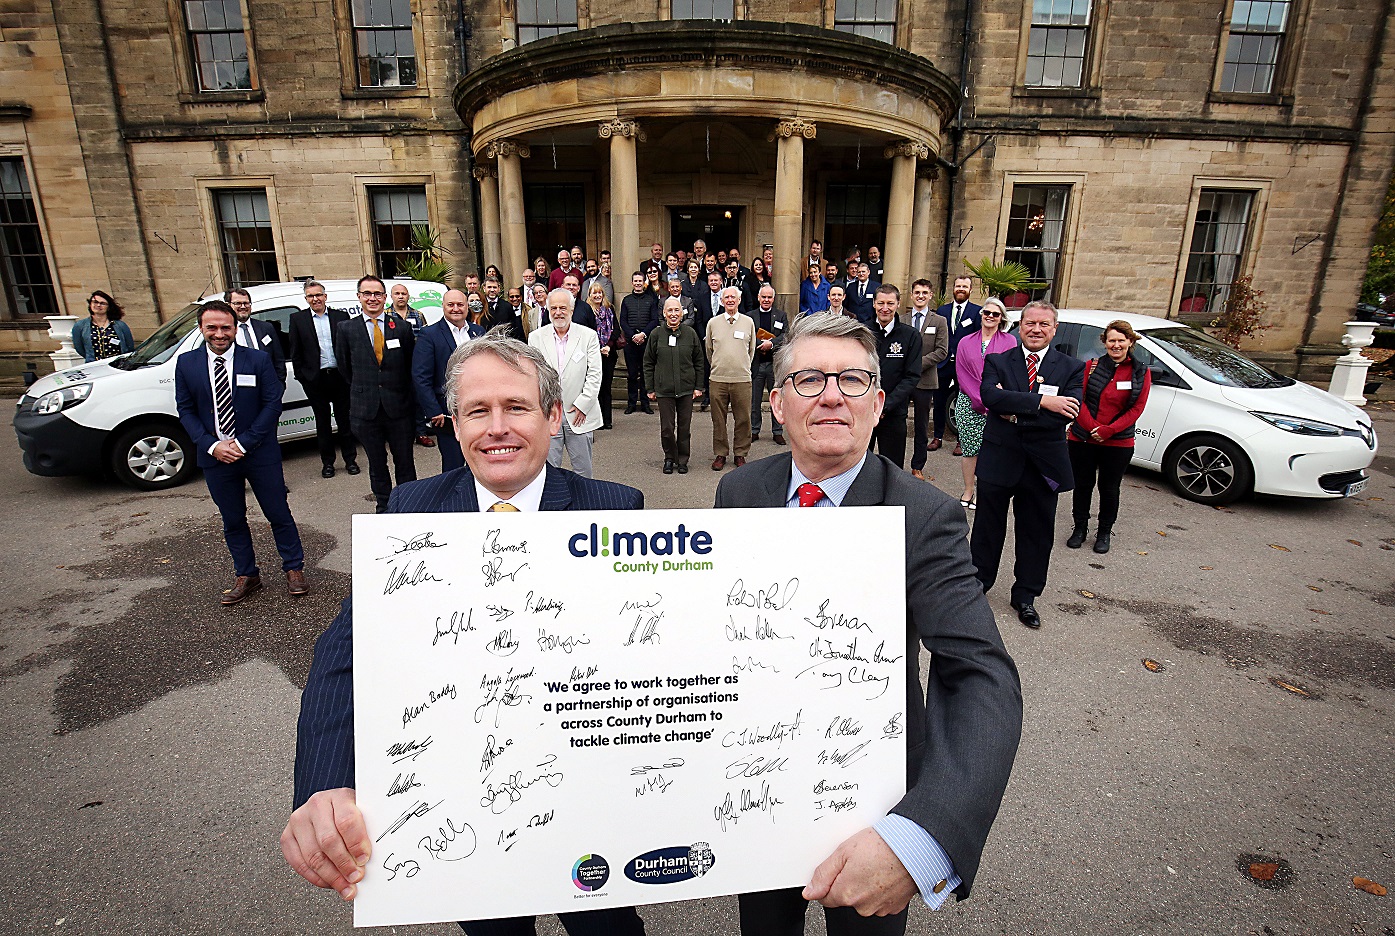 Two people at forefront of picture holding Climate County Durham pledge including lots of signatures of those many people stood in the background. Backdrop is Beamish Hall and two electric vehicles.